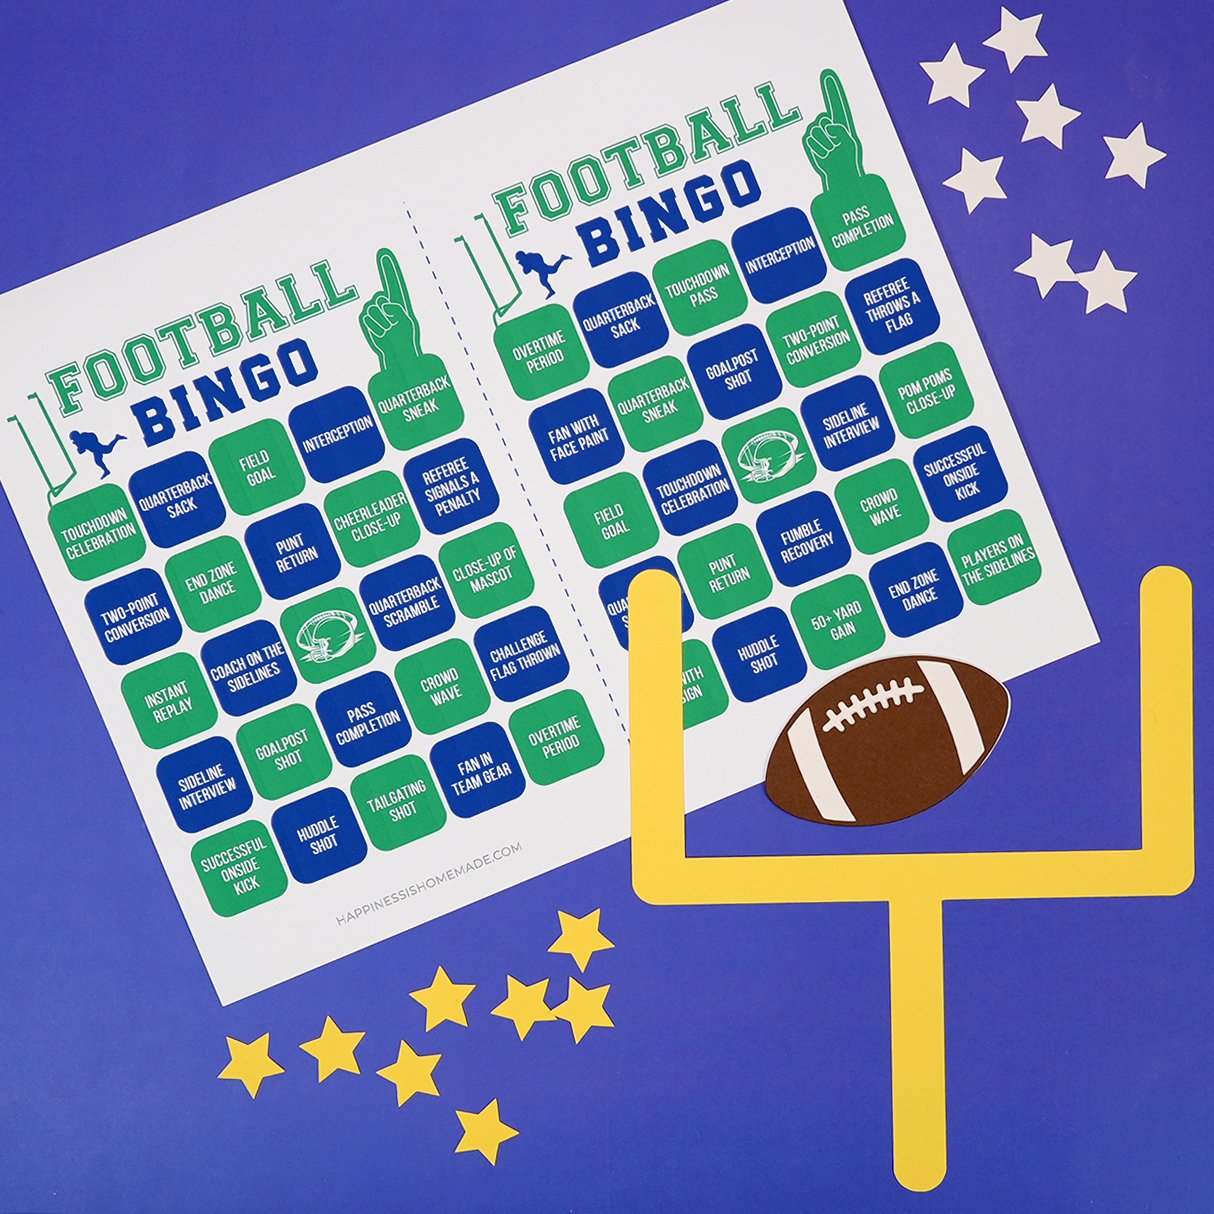 Green and blue football bingo game cards with star markers, football, and yellow goalpost on a blue background